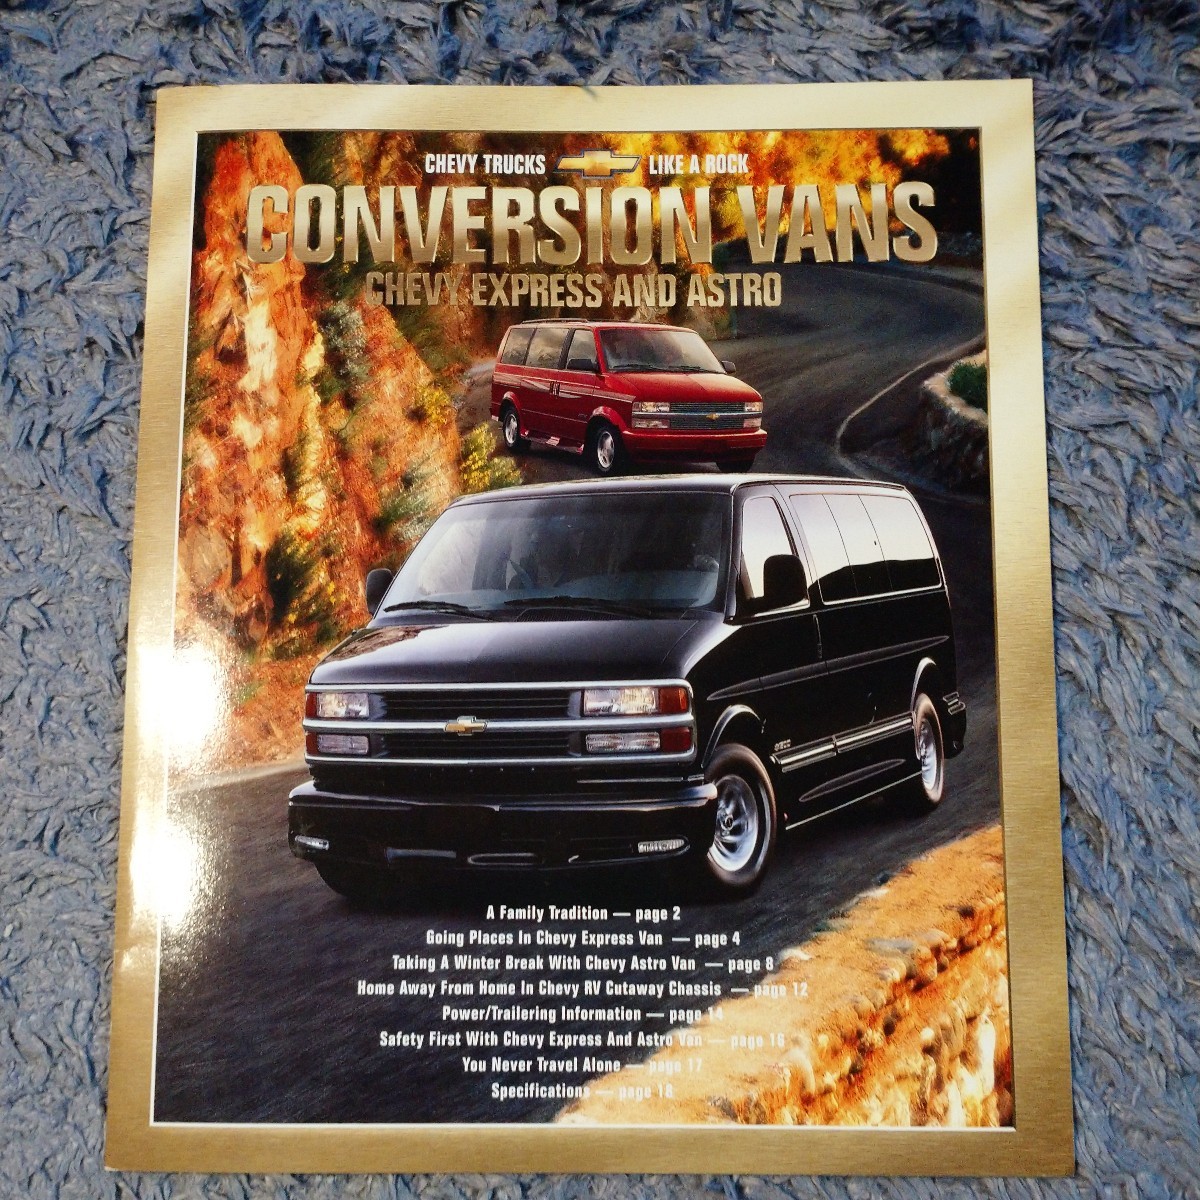  Chevrolet conversion van Chevy Express Astro Chevy RV 2001 year of model 21 page book@ country catalog not yet read goods rare out of print 